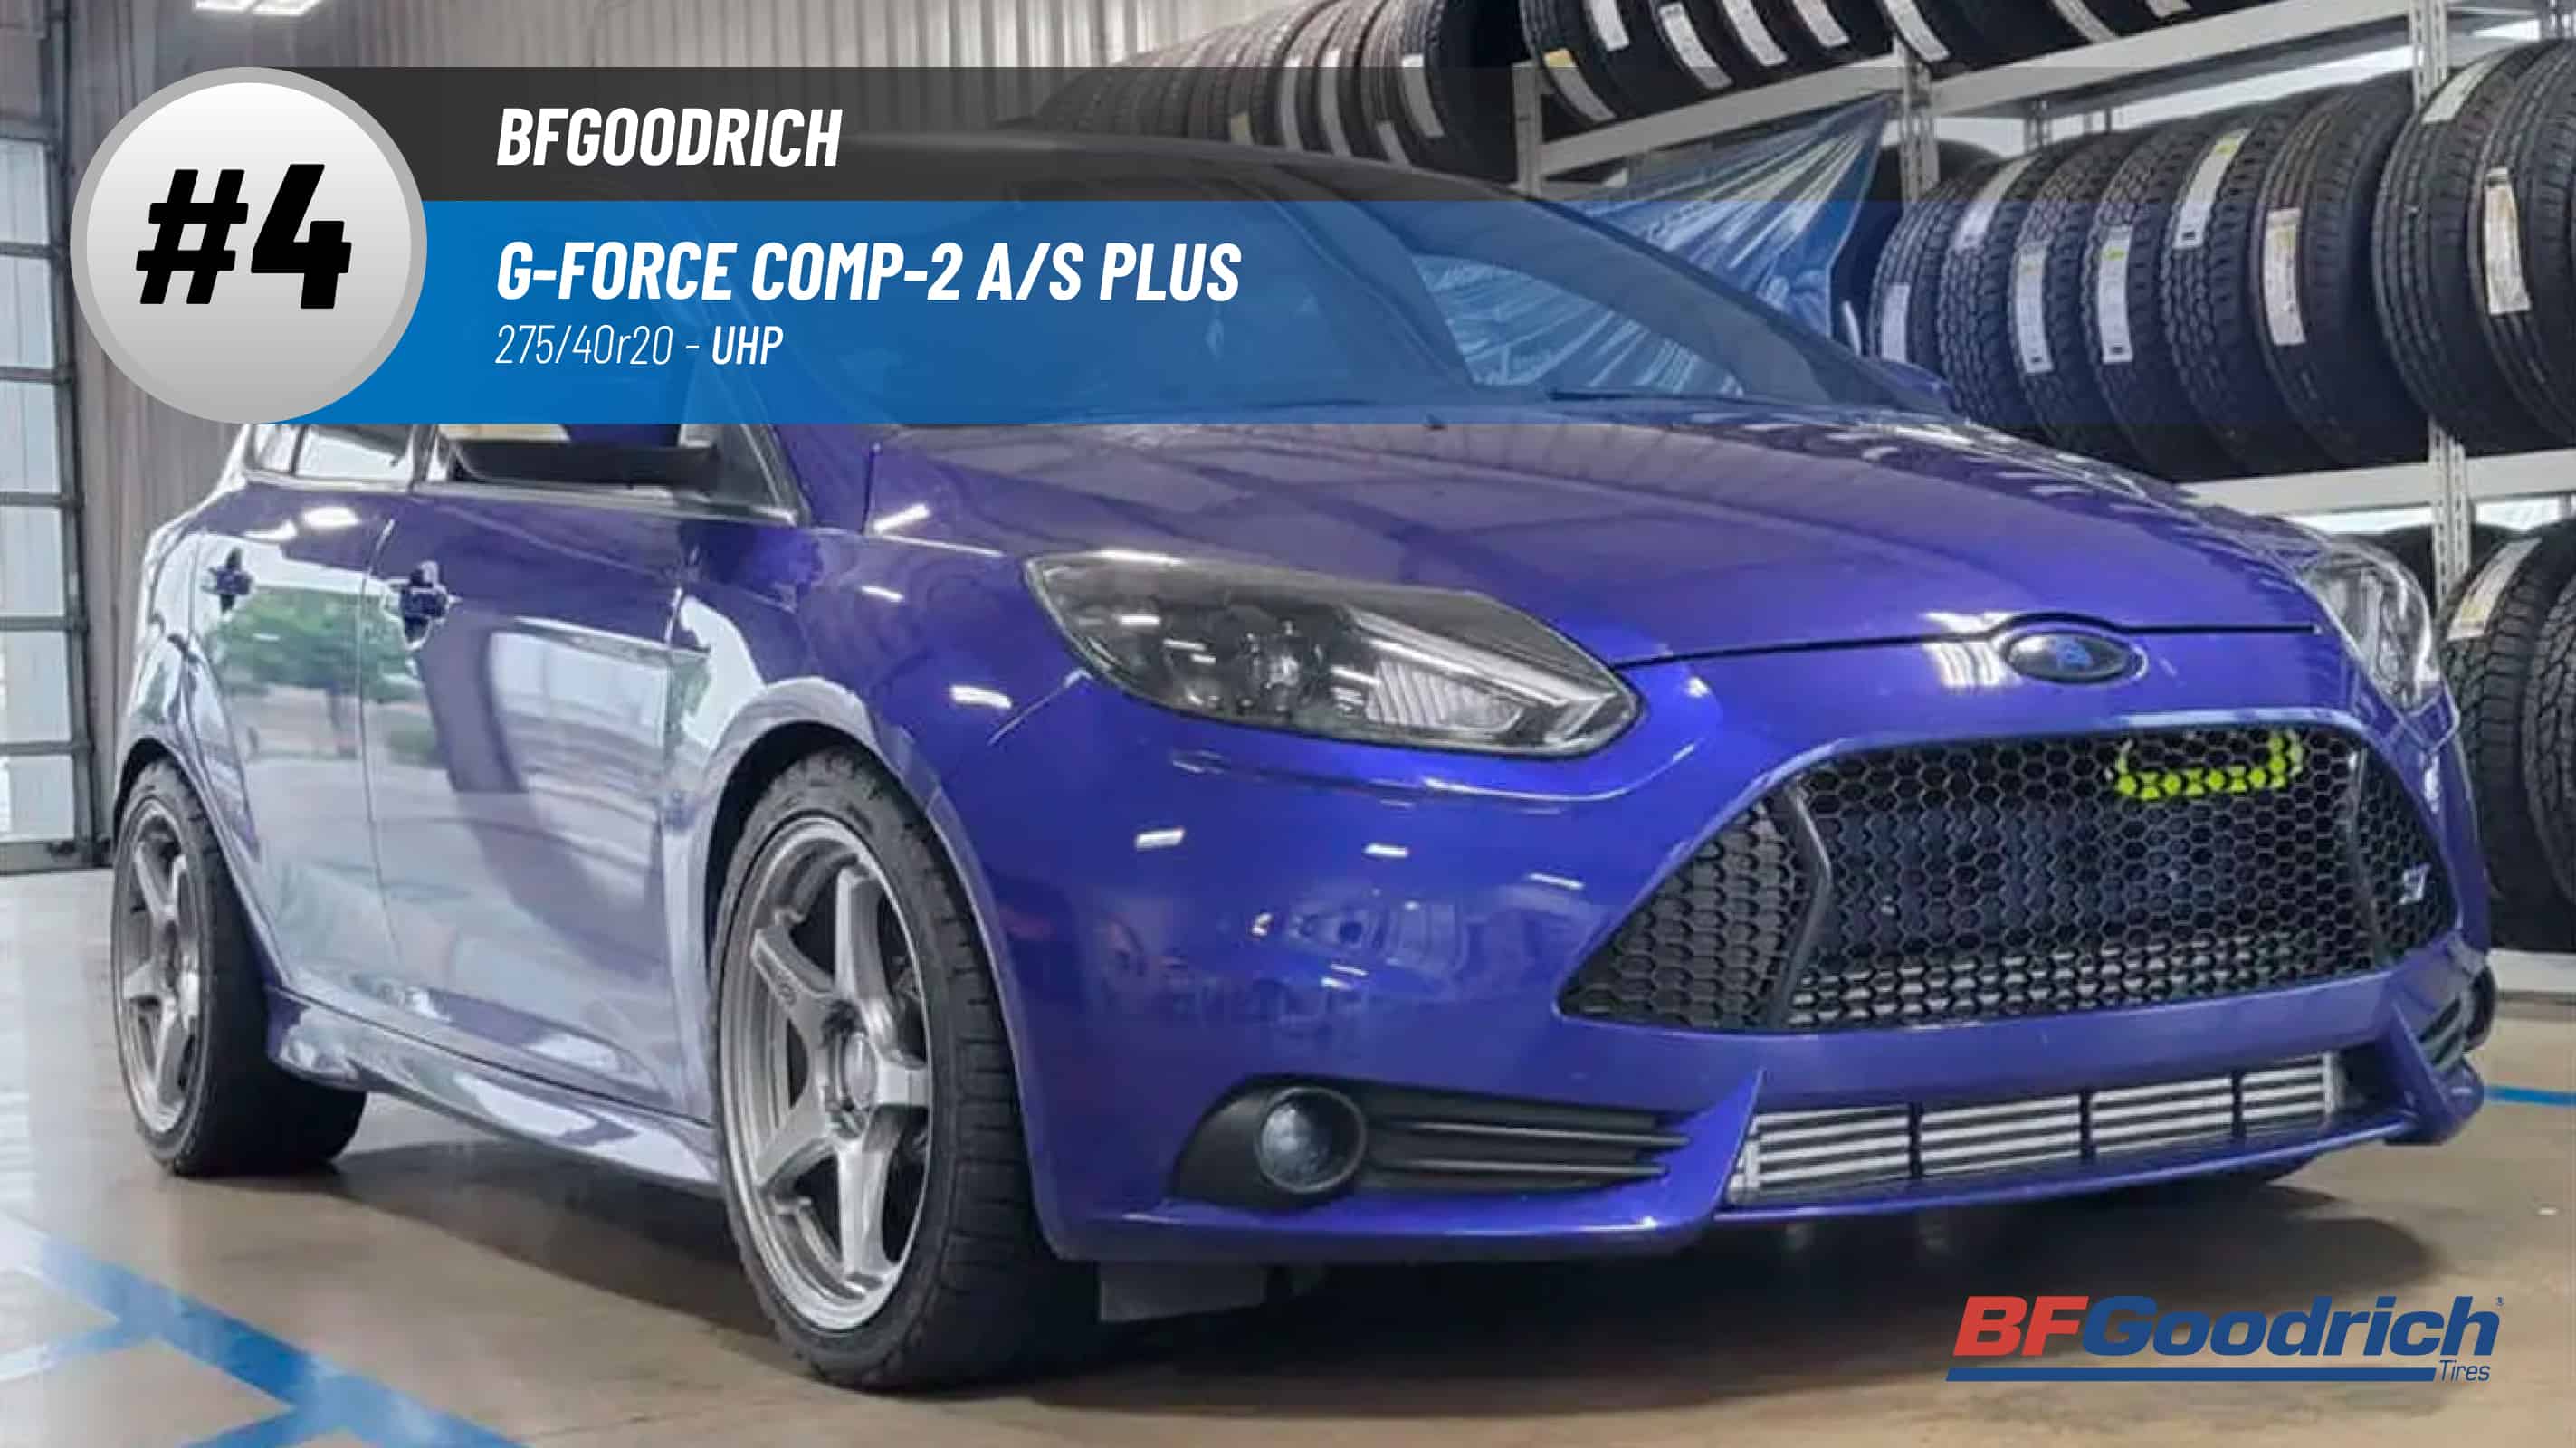 Top #4 UHP Tires: BFGoodrich G-Force Comp-2 A/S Plus – 275/40 R20